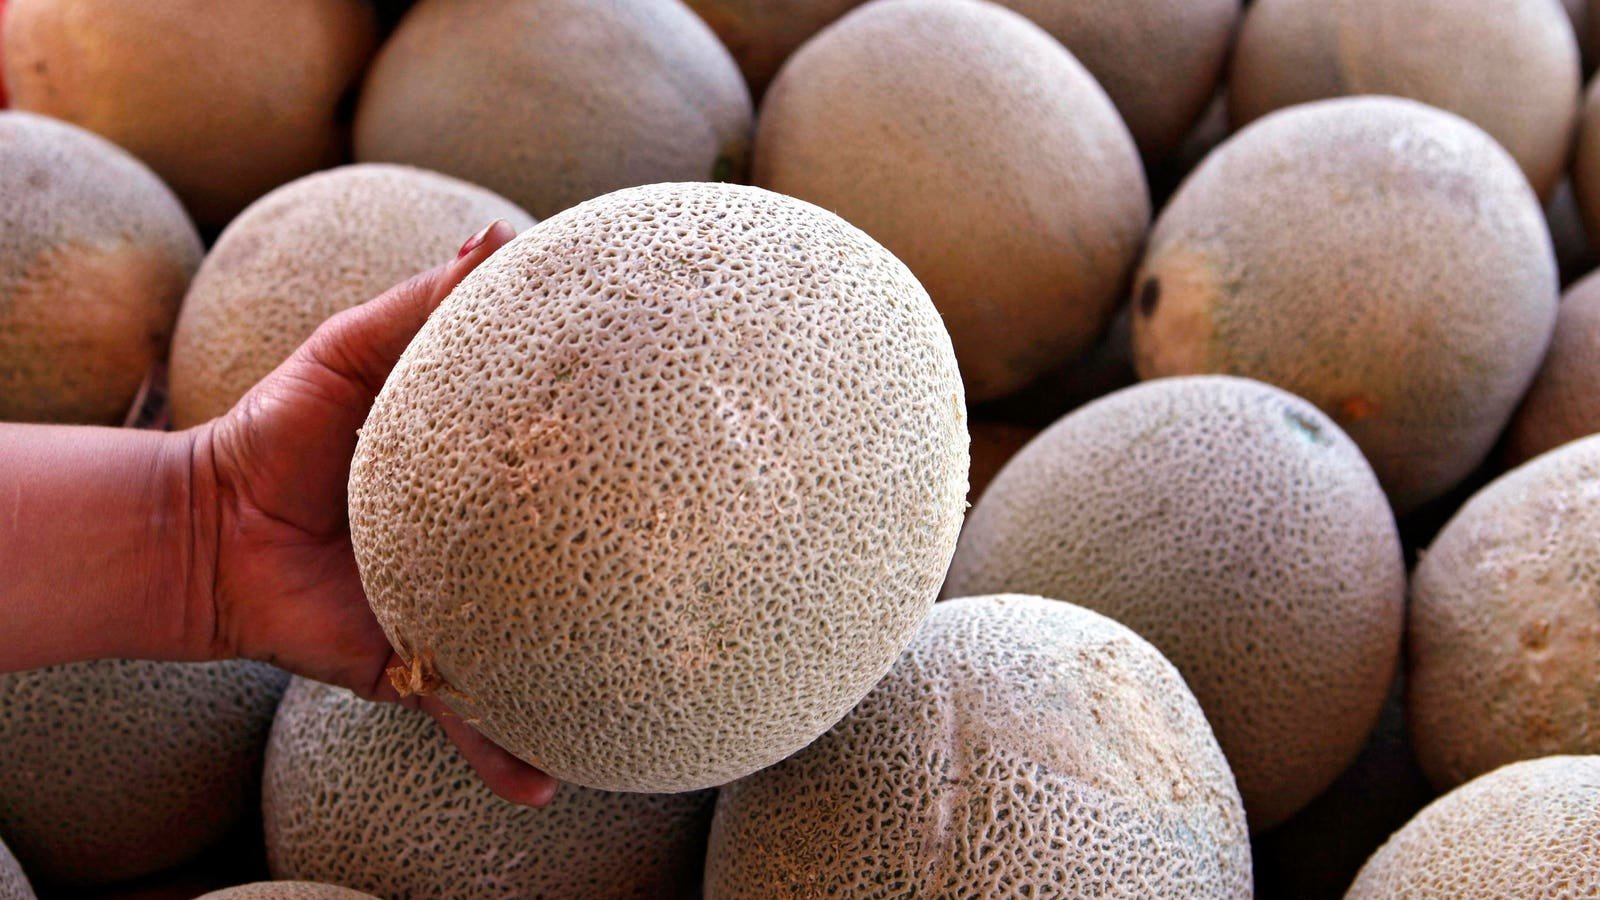 Salmonella Outbreak Linked To Cantaloupes—Here’s What To Know As CDC Issues Warning